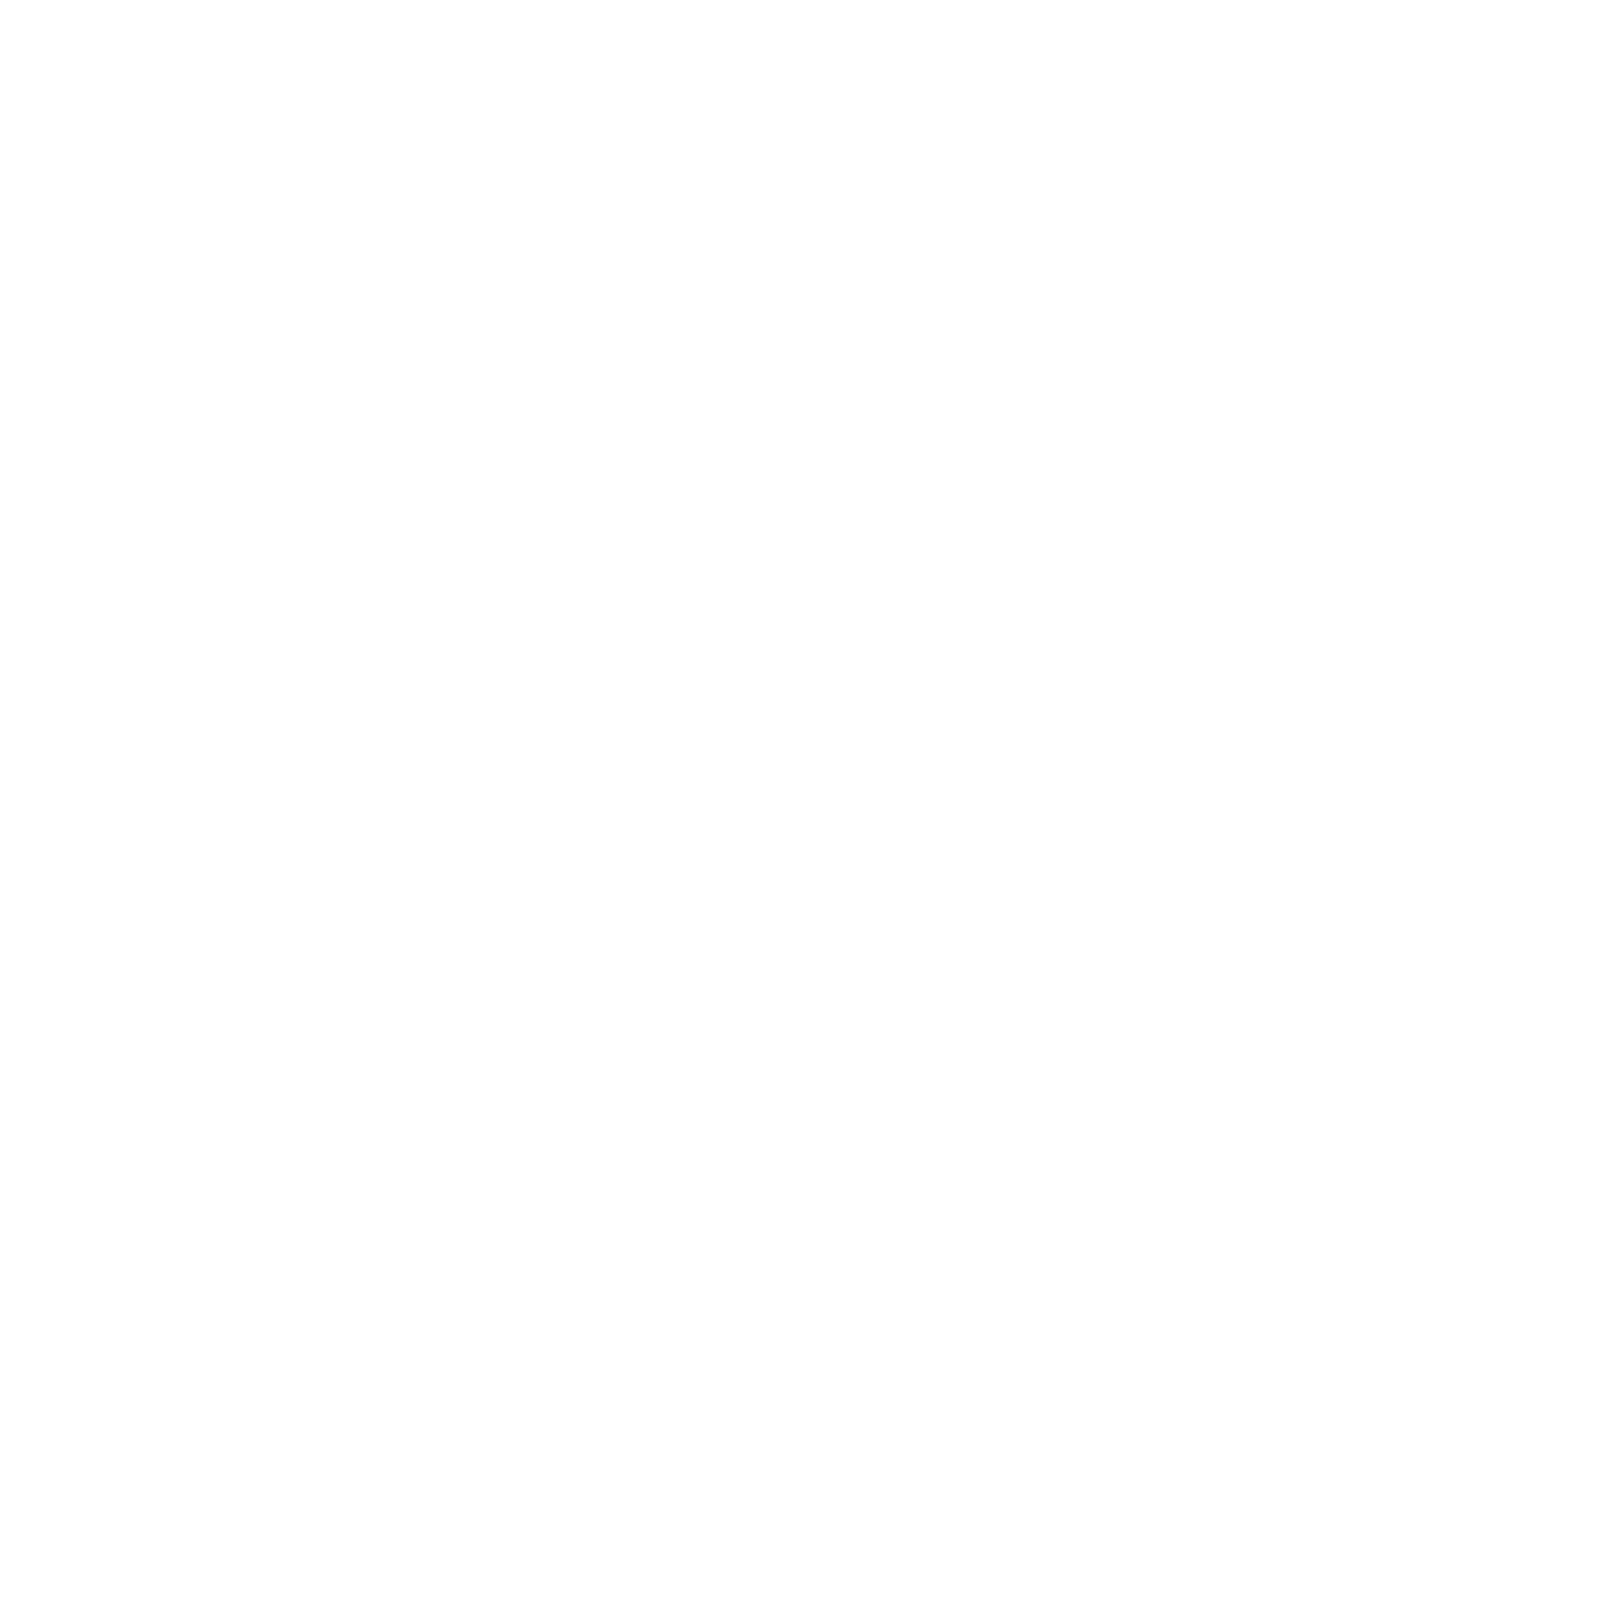 Terra Project Holding - MICAP